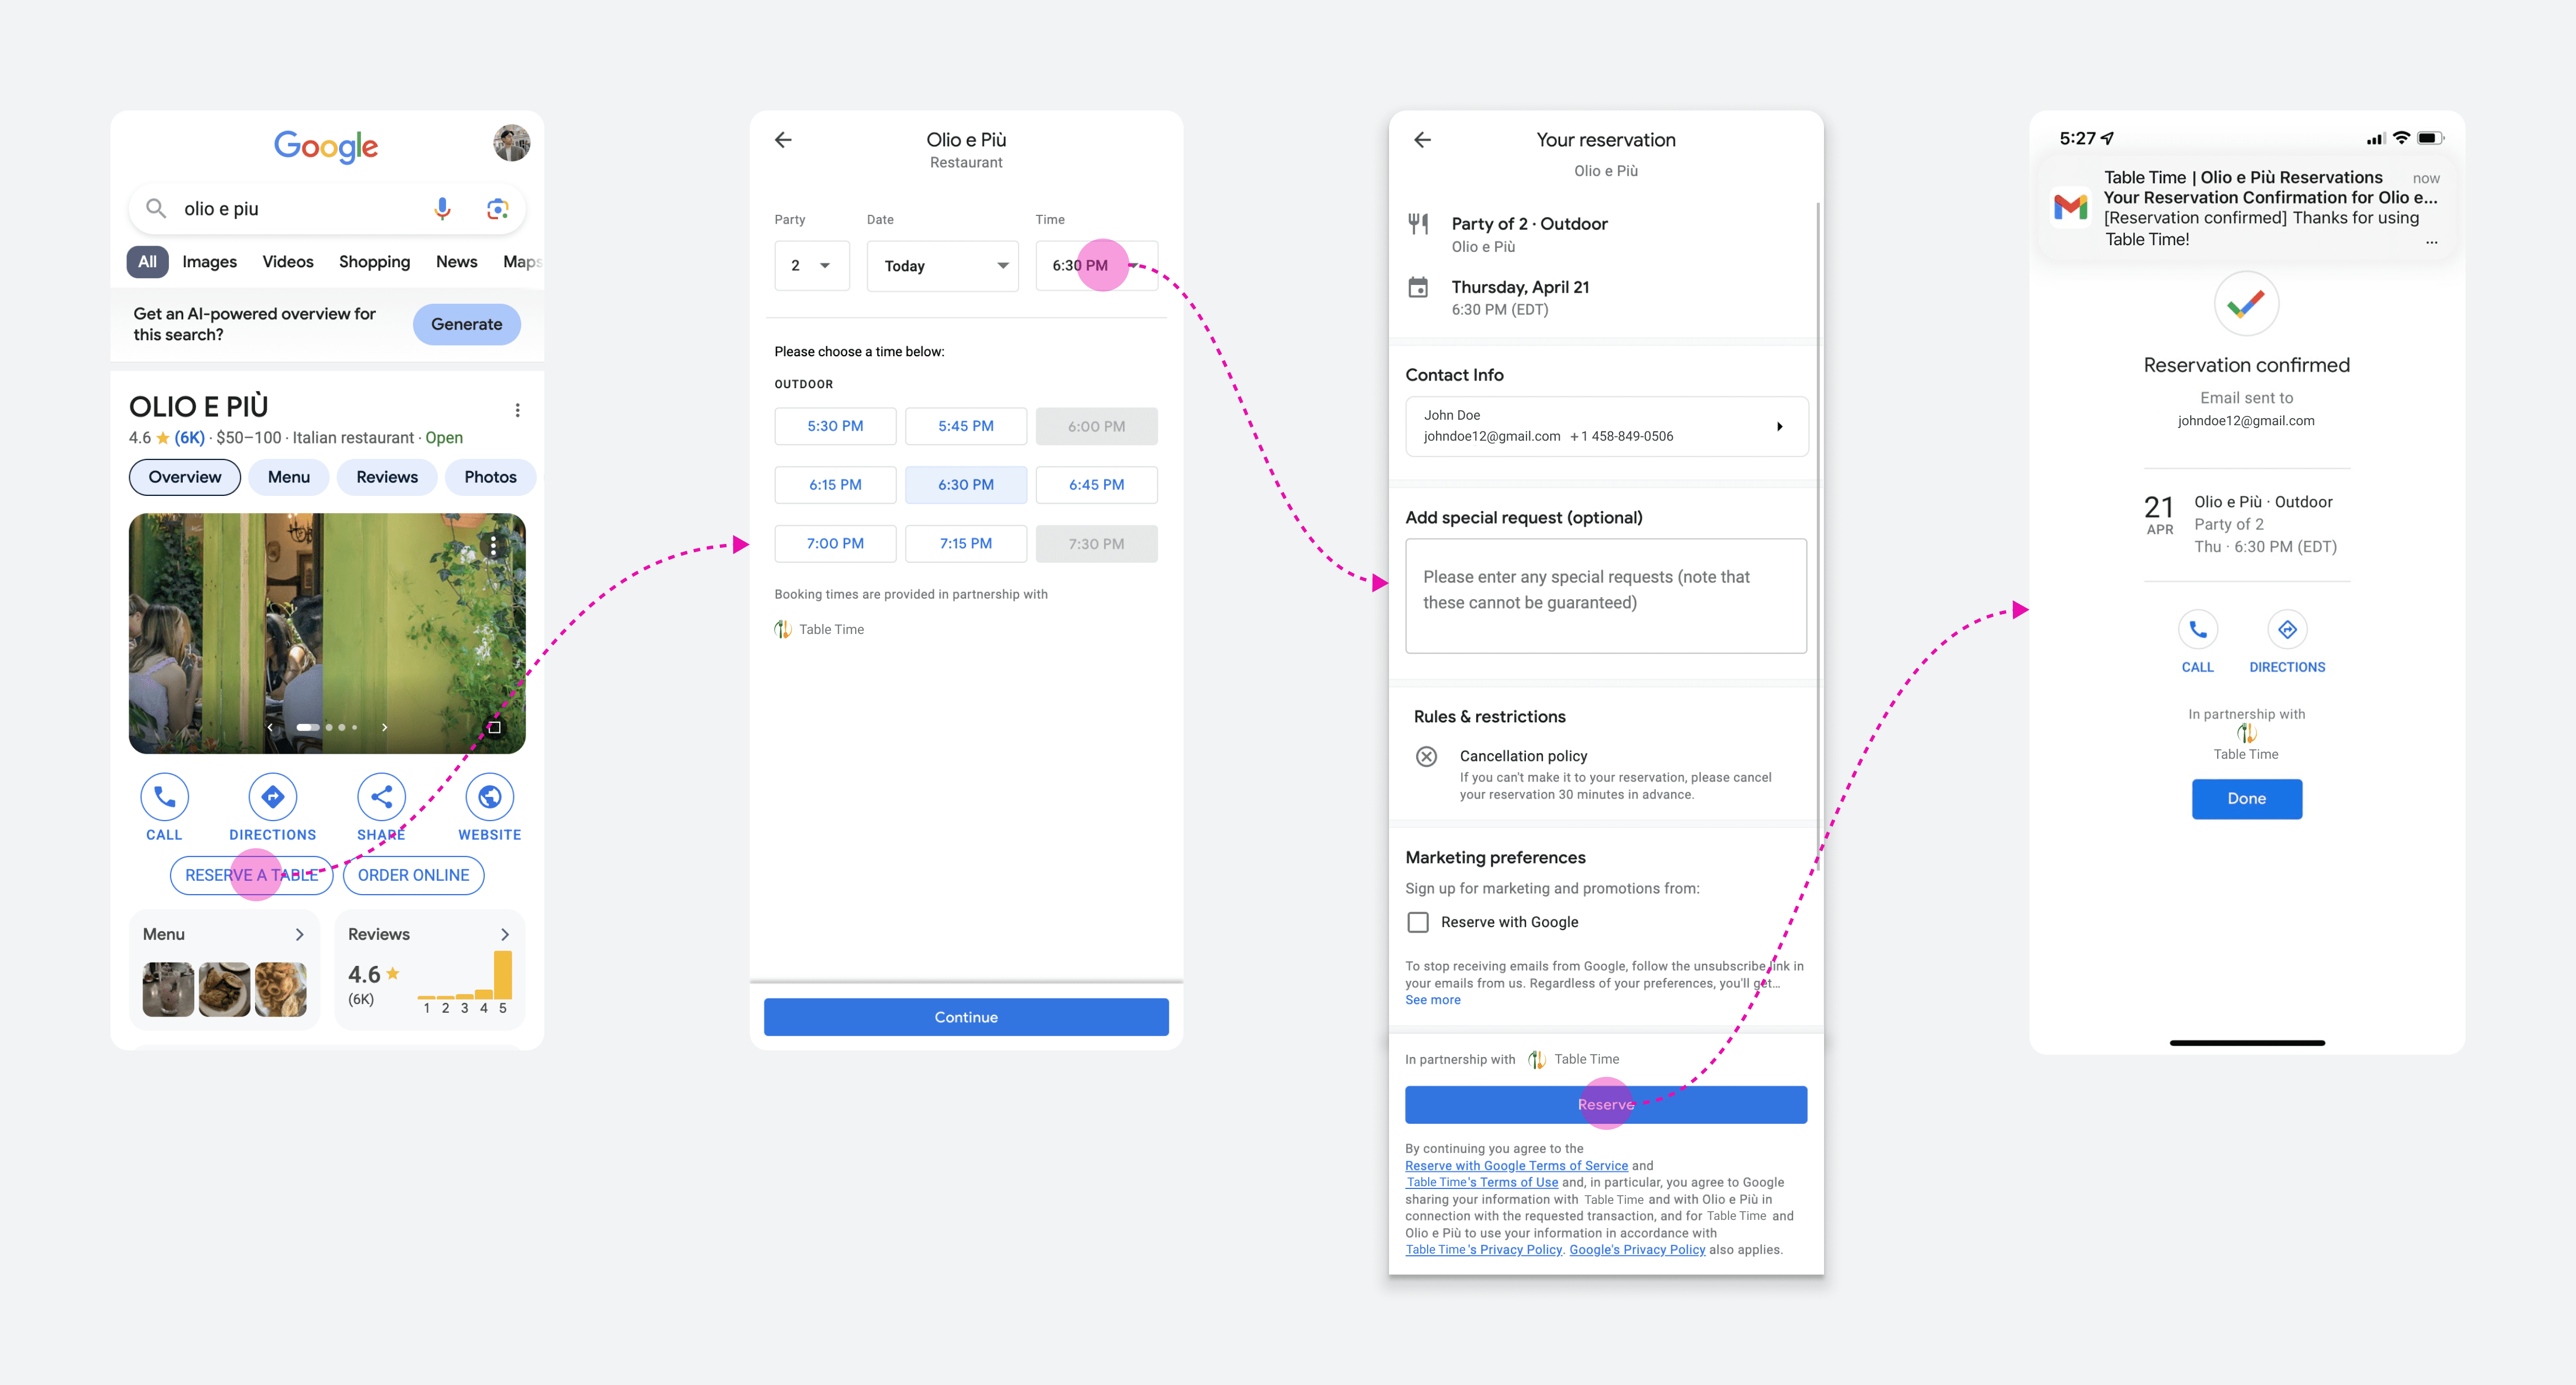 Example of the booking flow via Reserve with Google